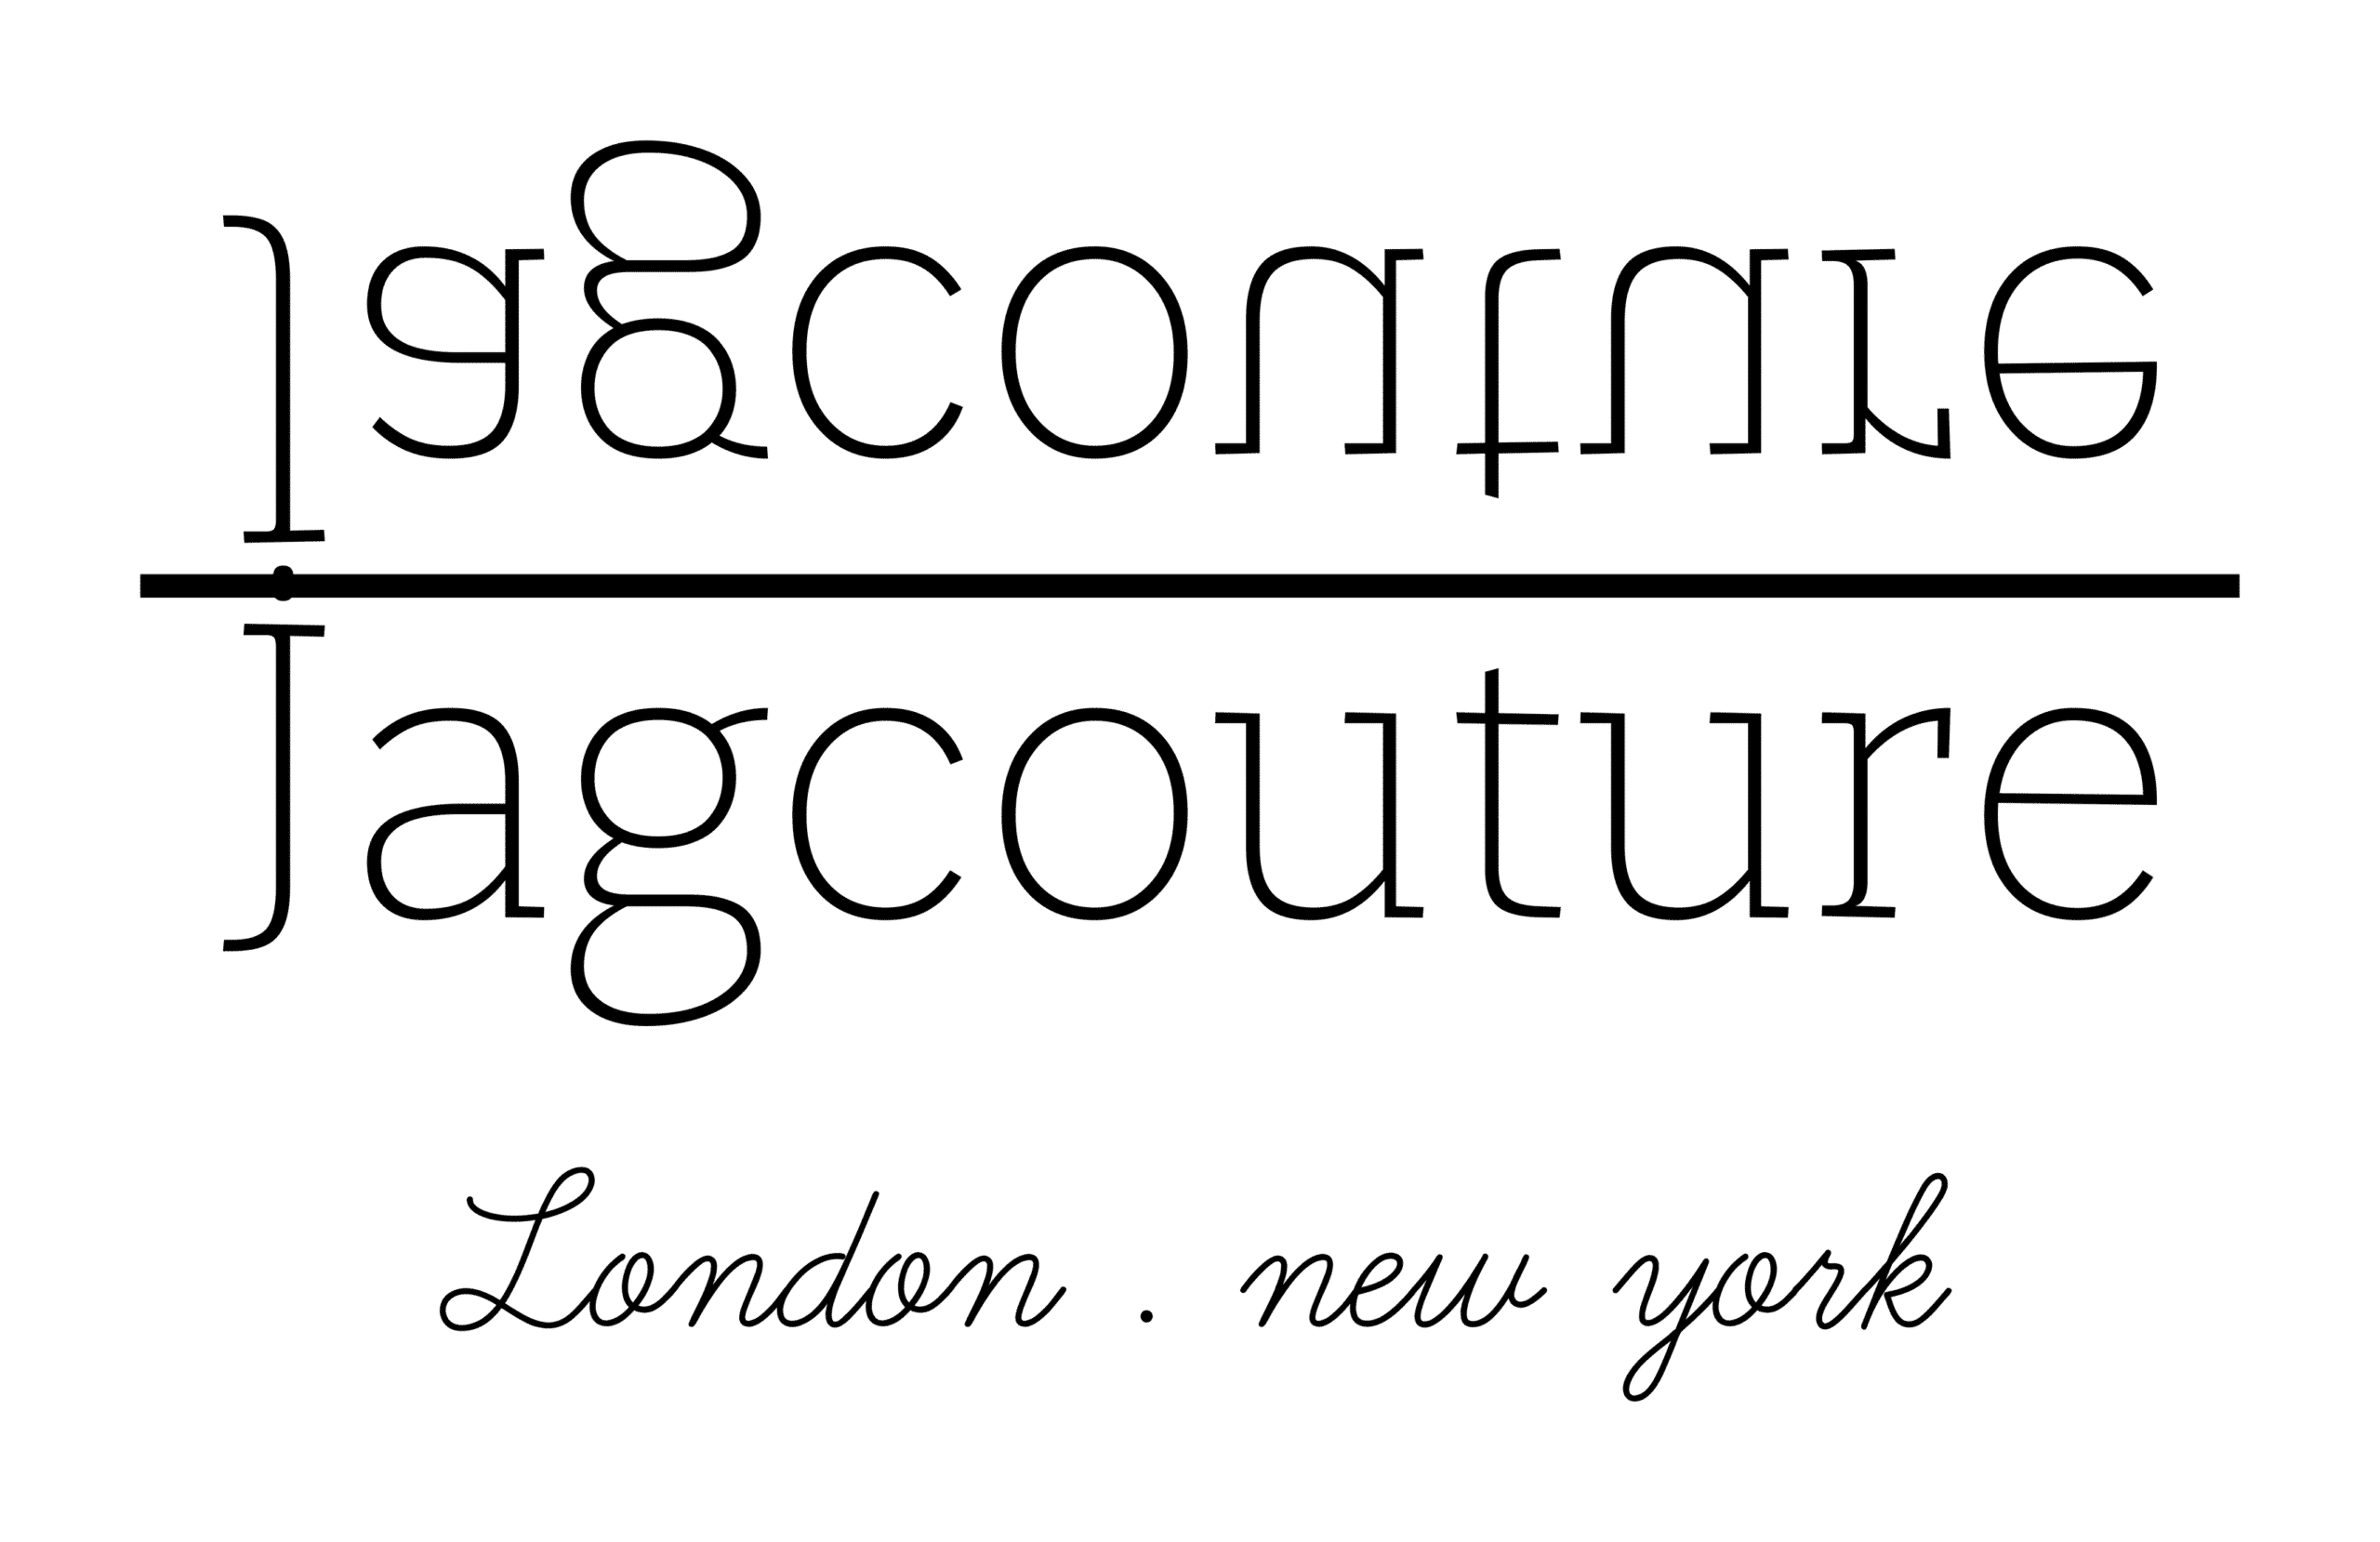 Jag Couture London London - New York